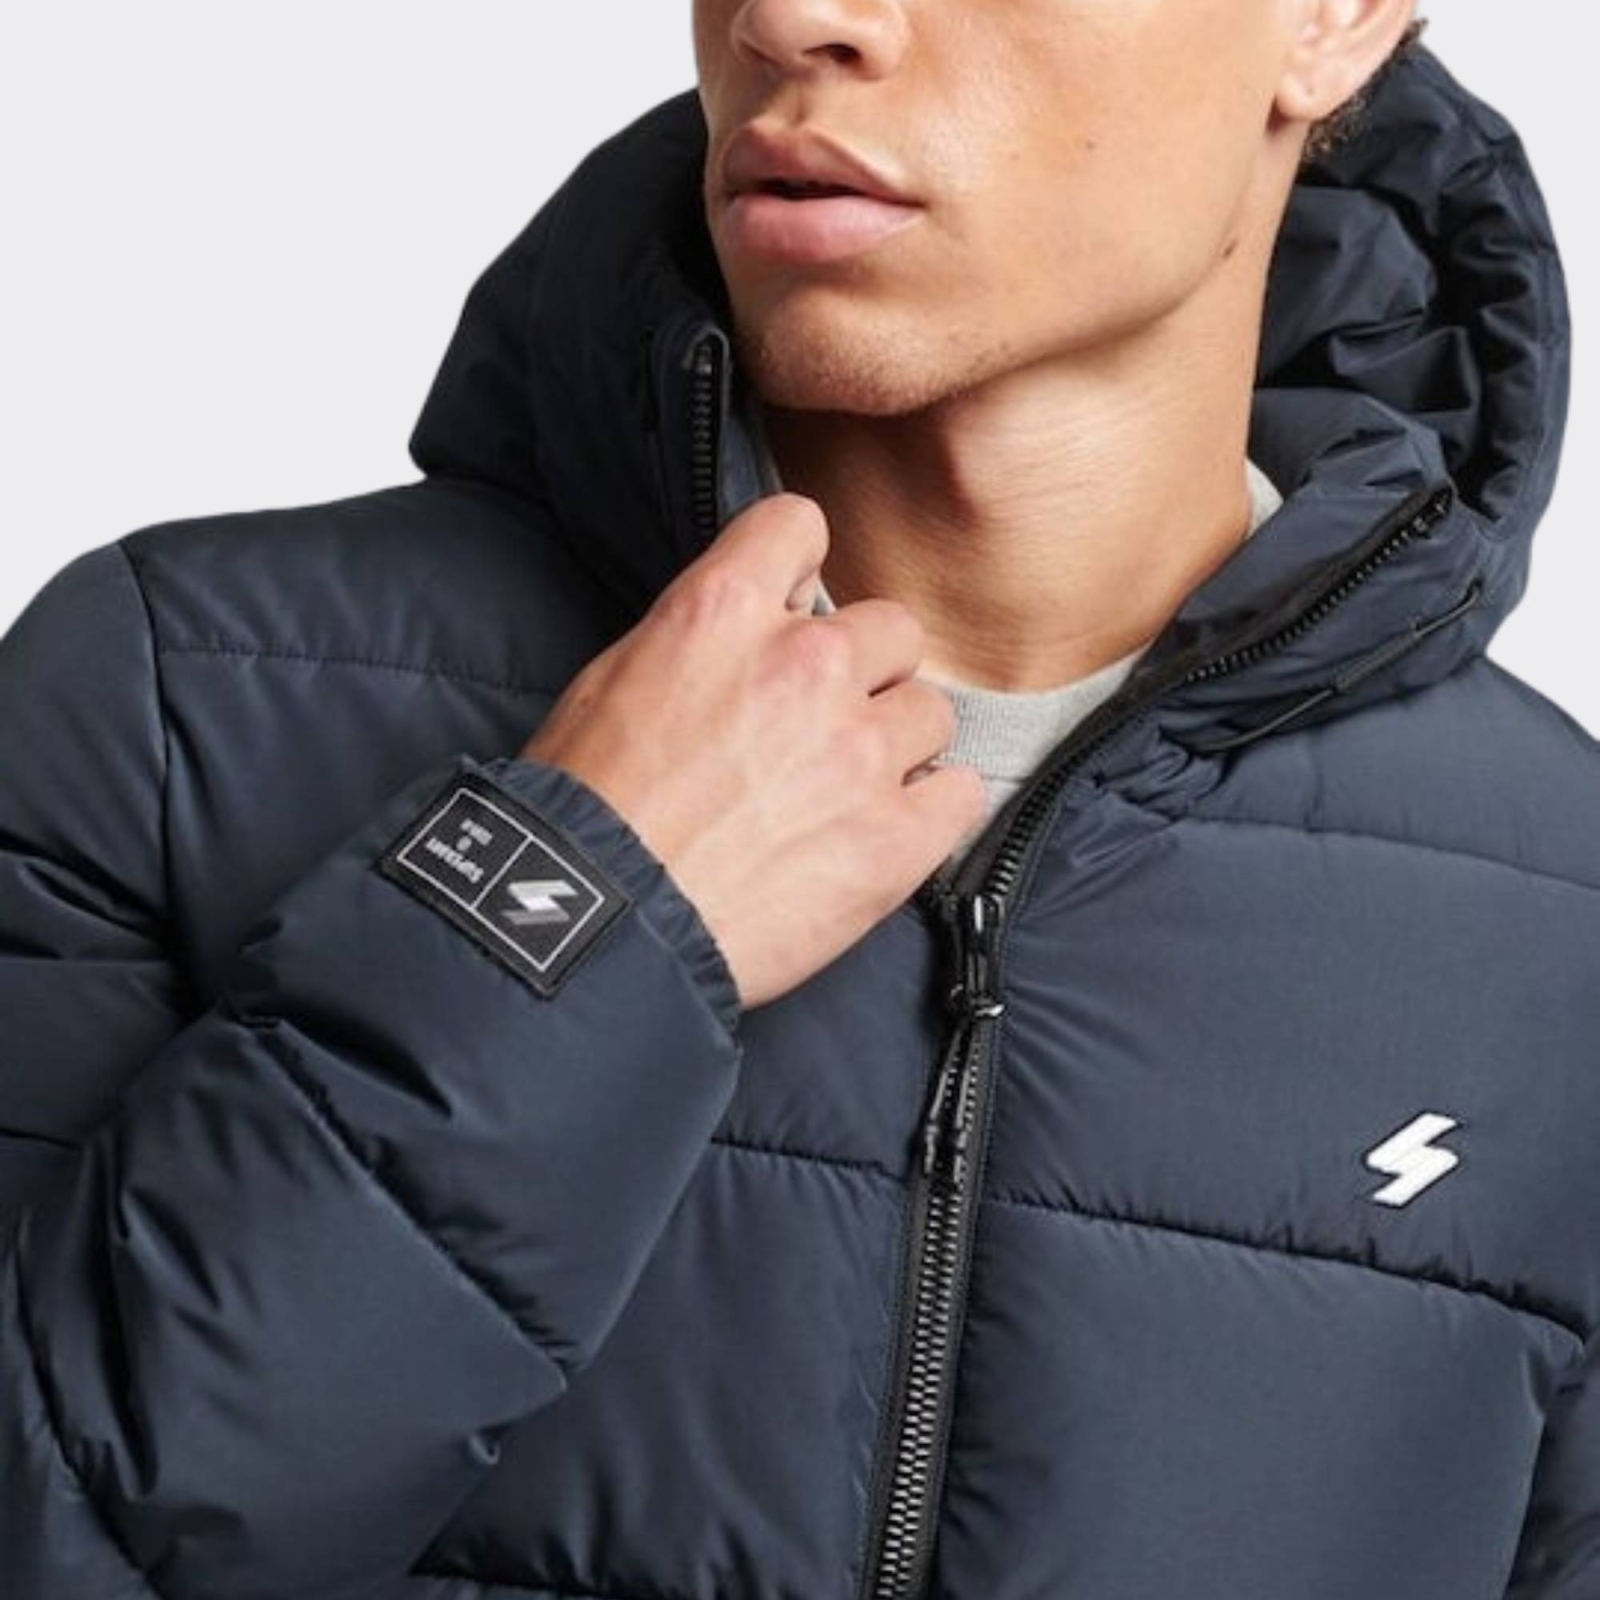 SUPERDRY HOODED SPORTS PUFFΕR JACKET MENS